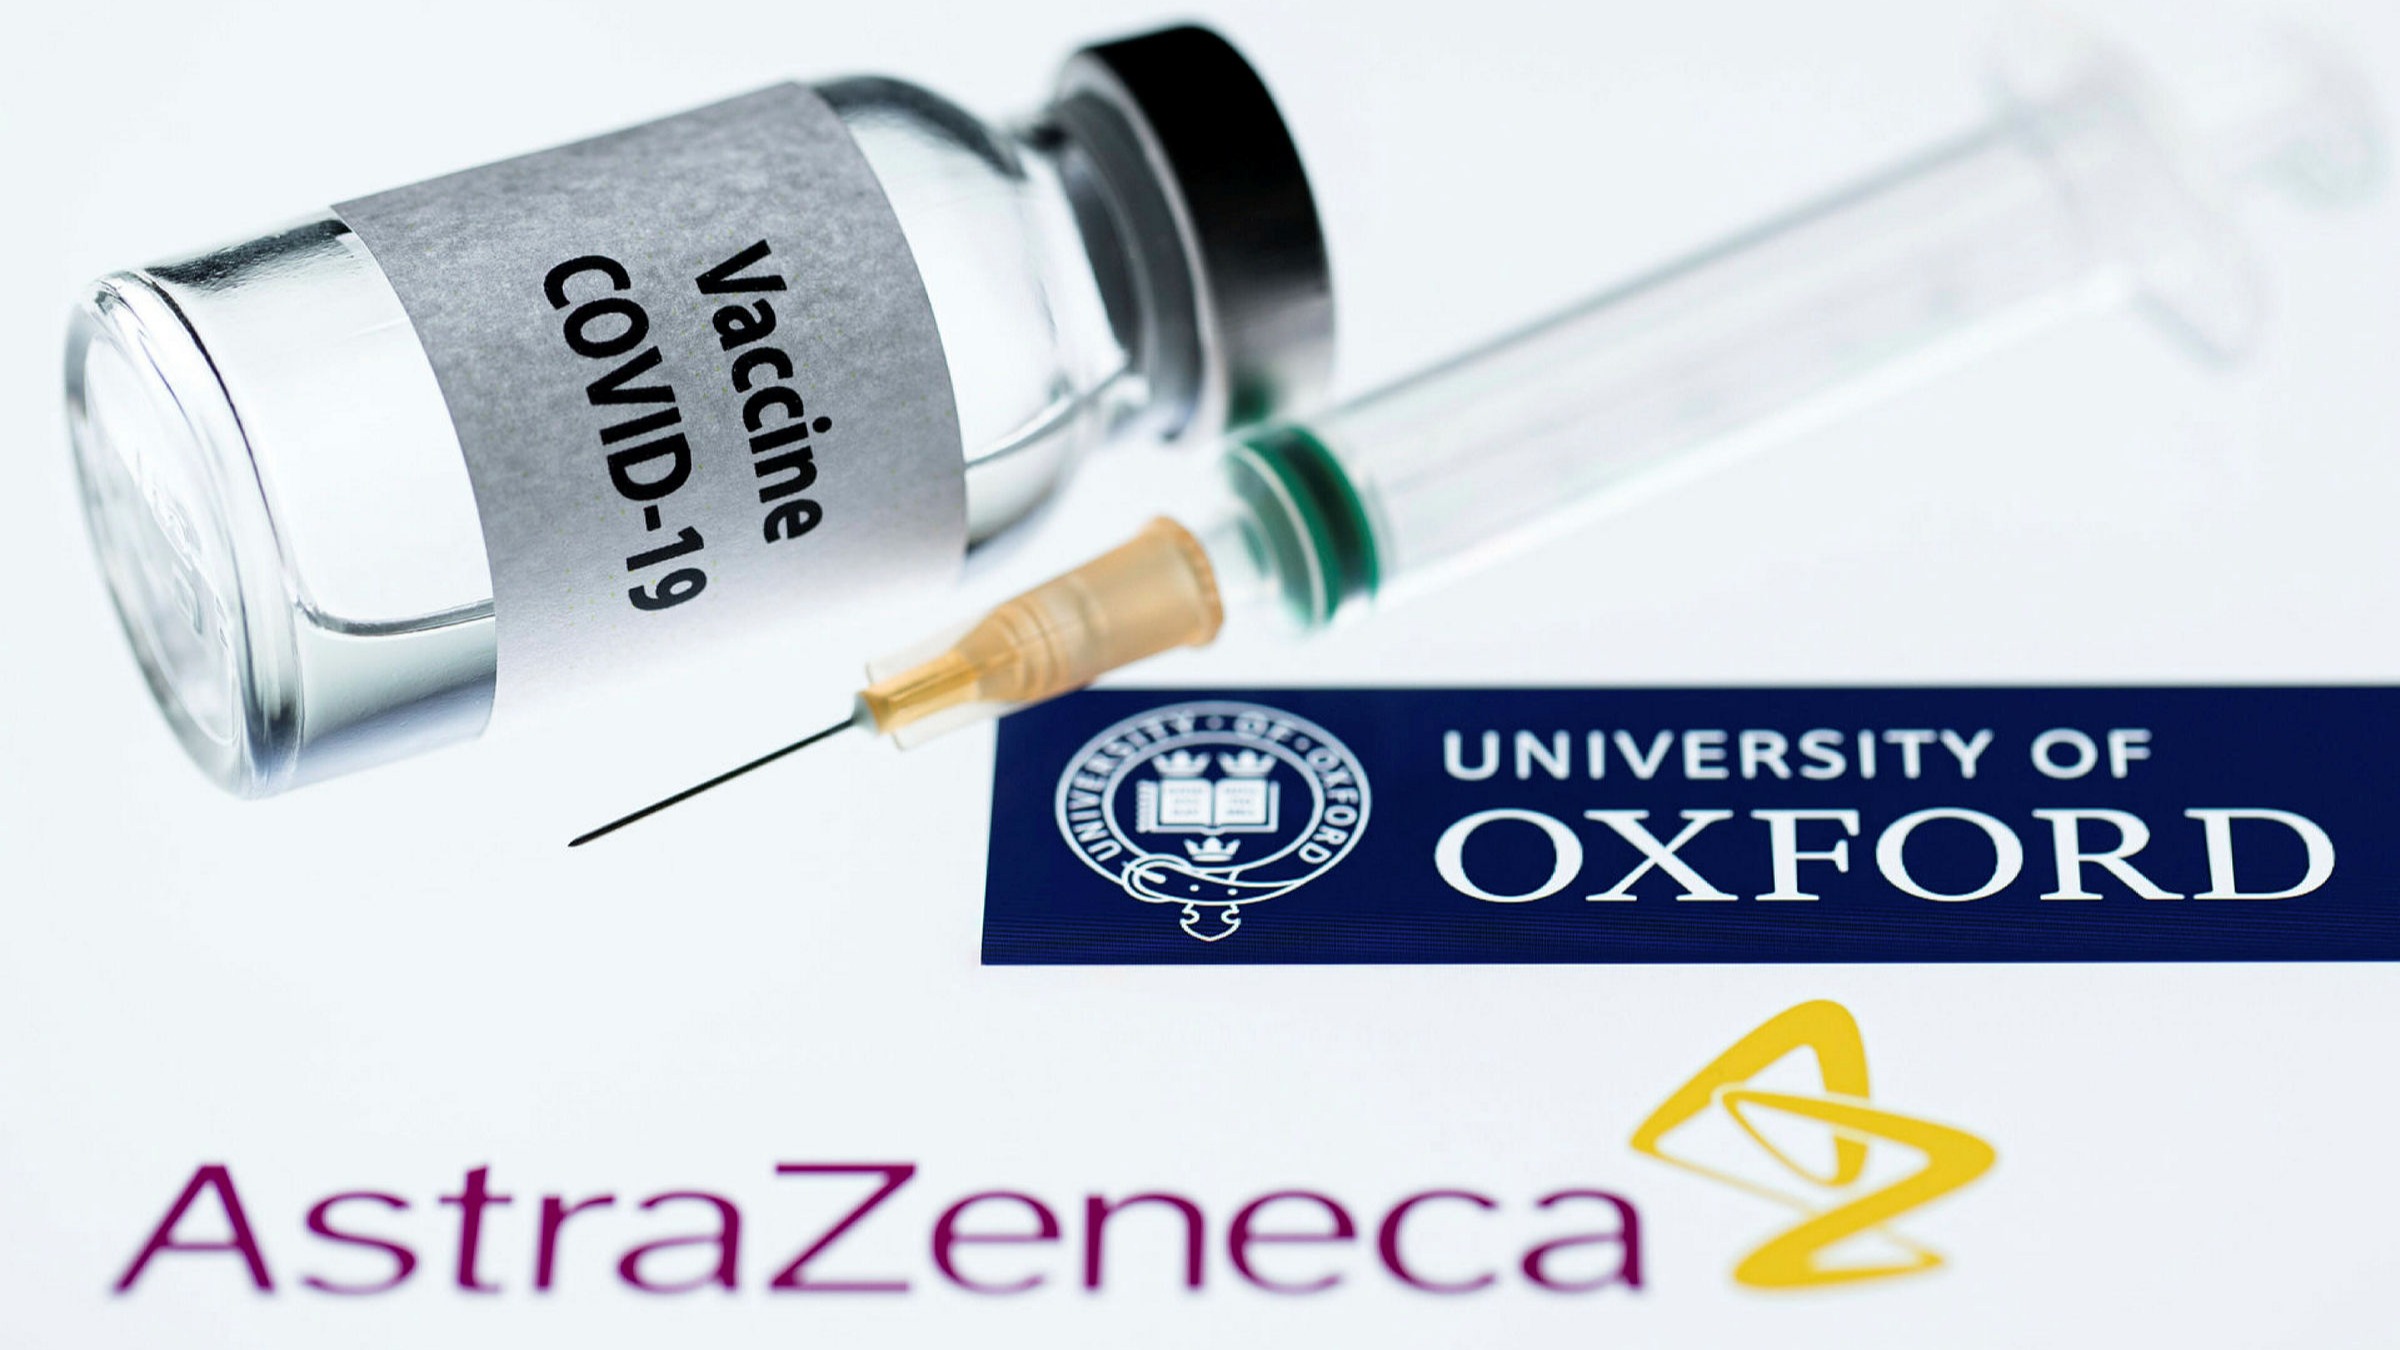 Doubts raised over AstraZeneca-Oxford vaccine data | Financial Times